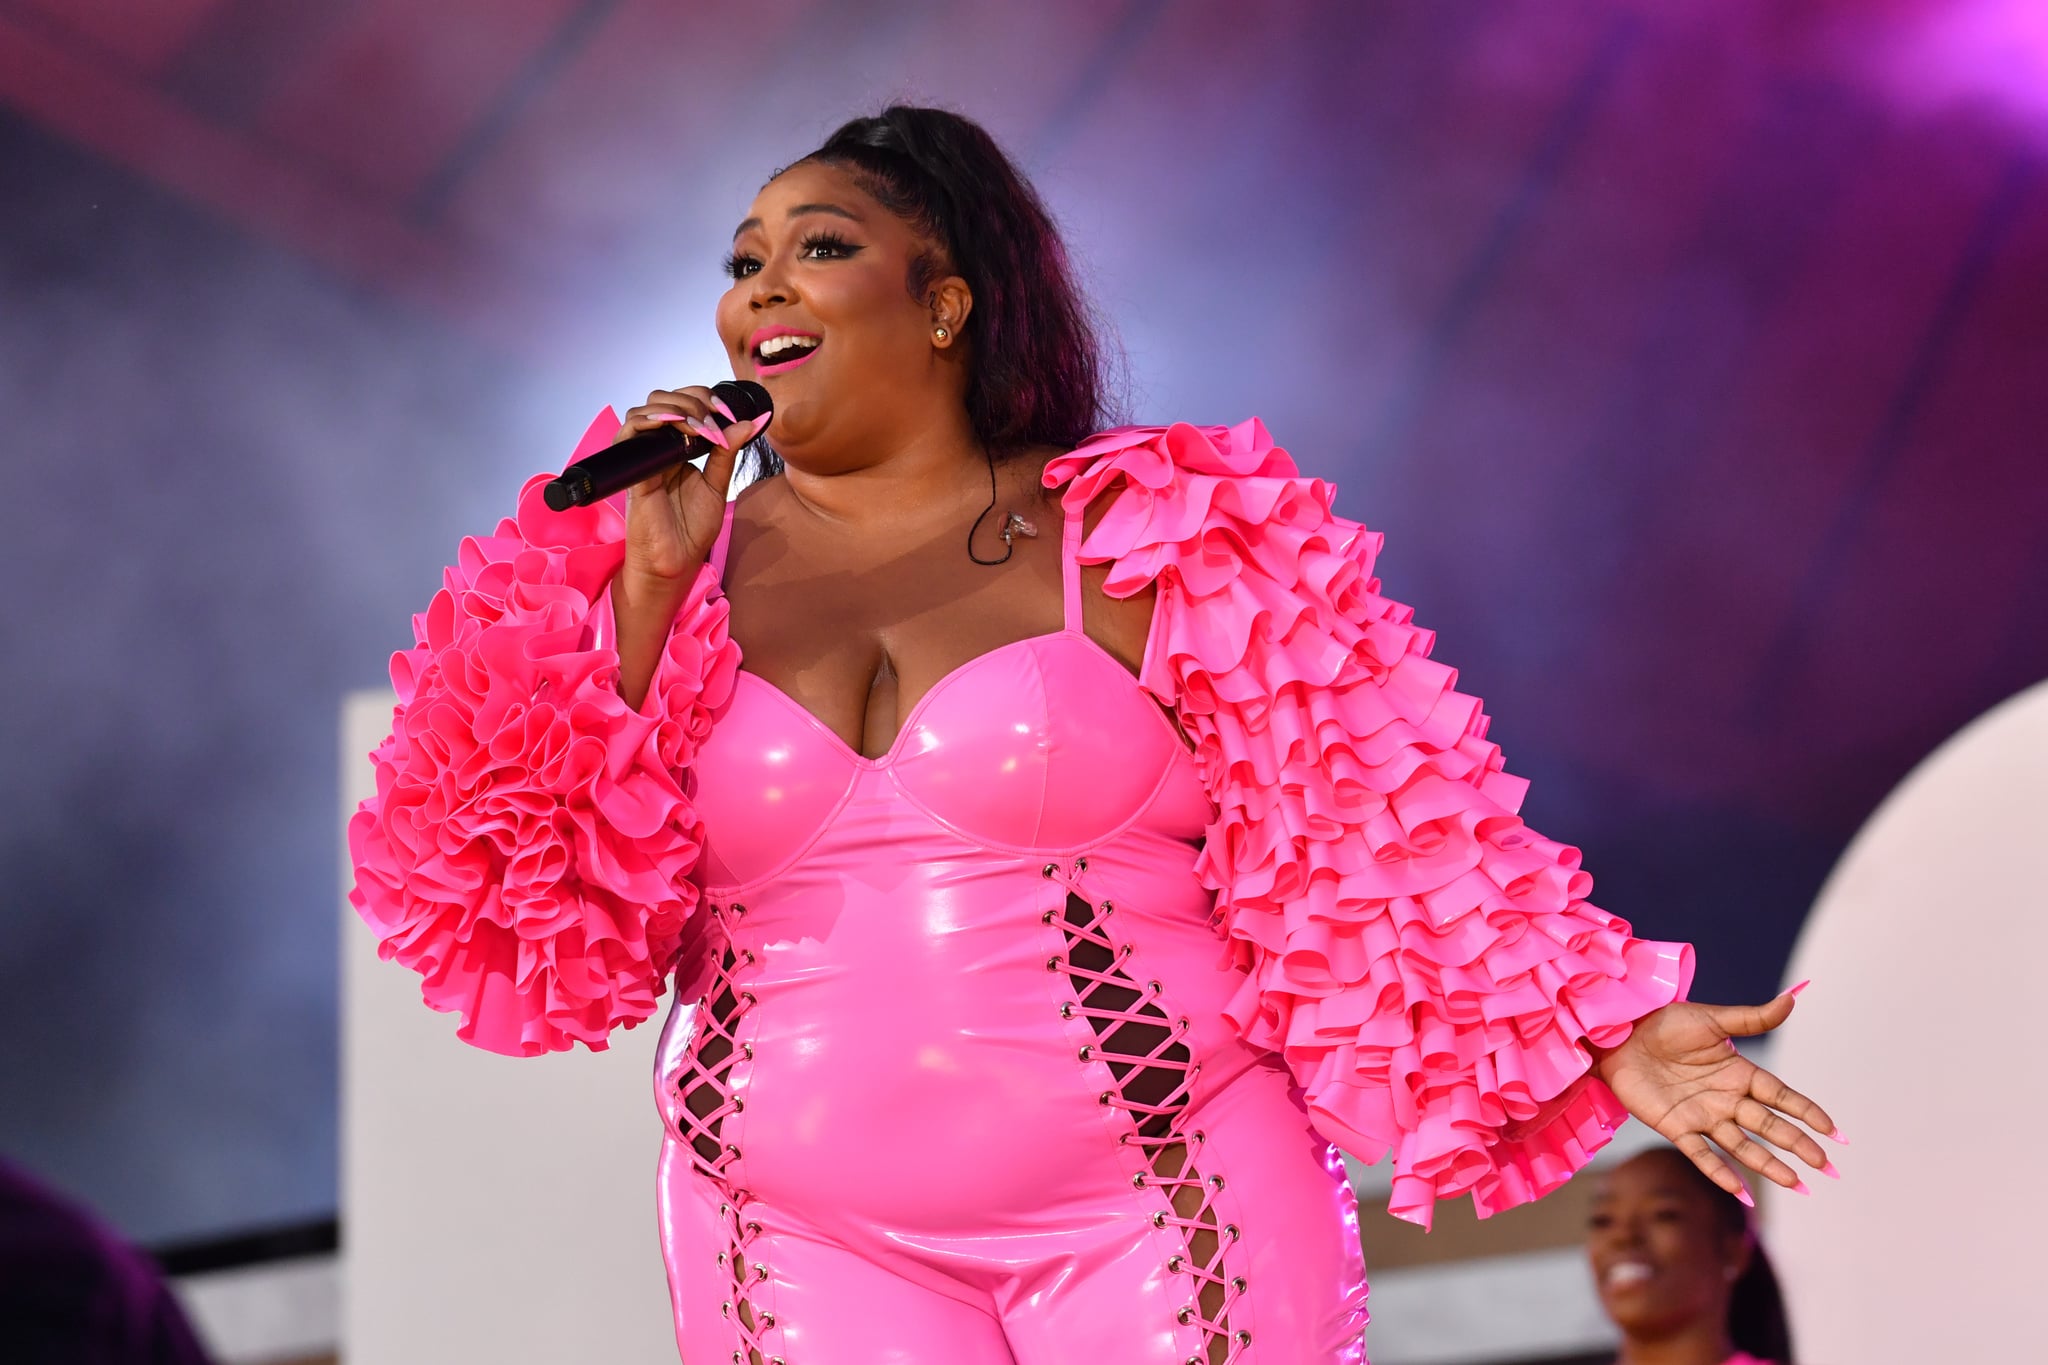 Lizzo Changes a Lyric in "Grrrls" in Response to Criticism.